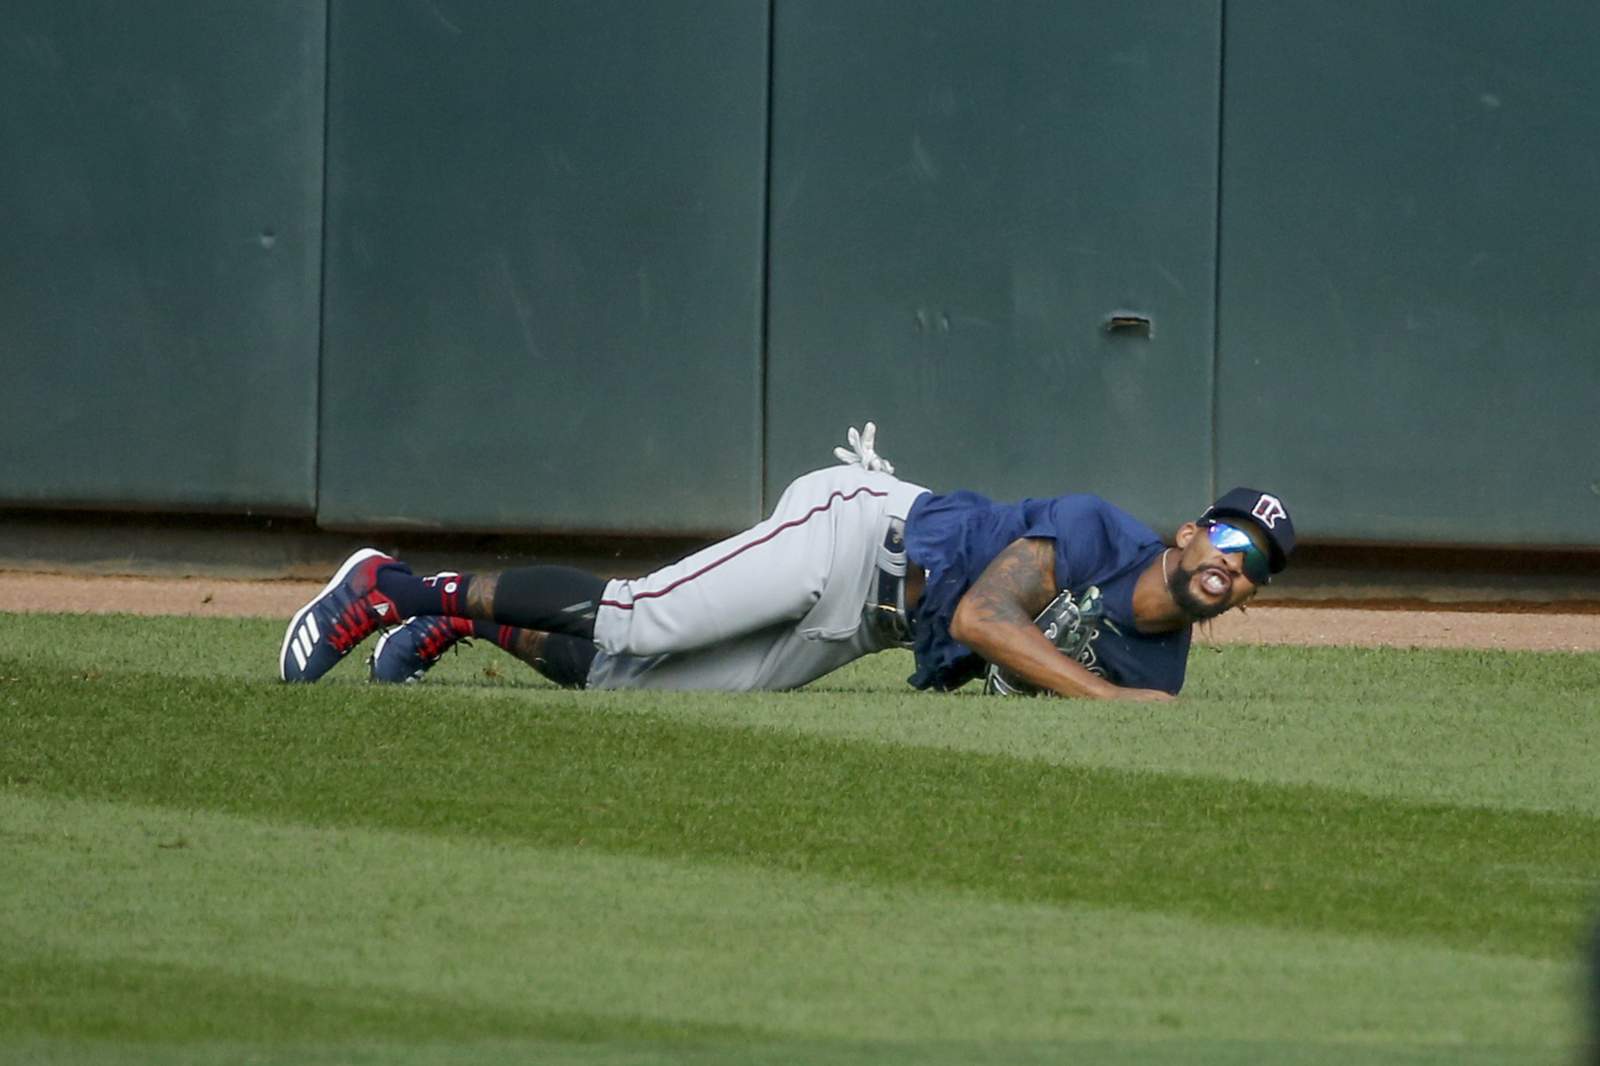 Twins relieved Buxton's left foot injury just a sprain